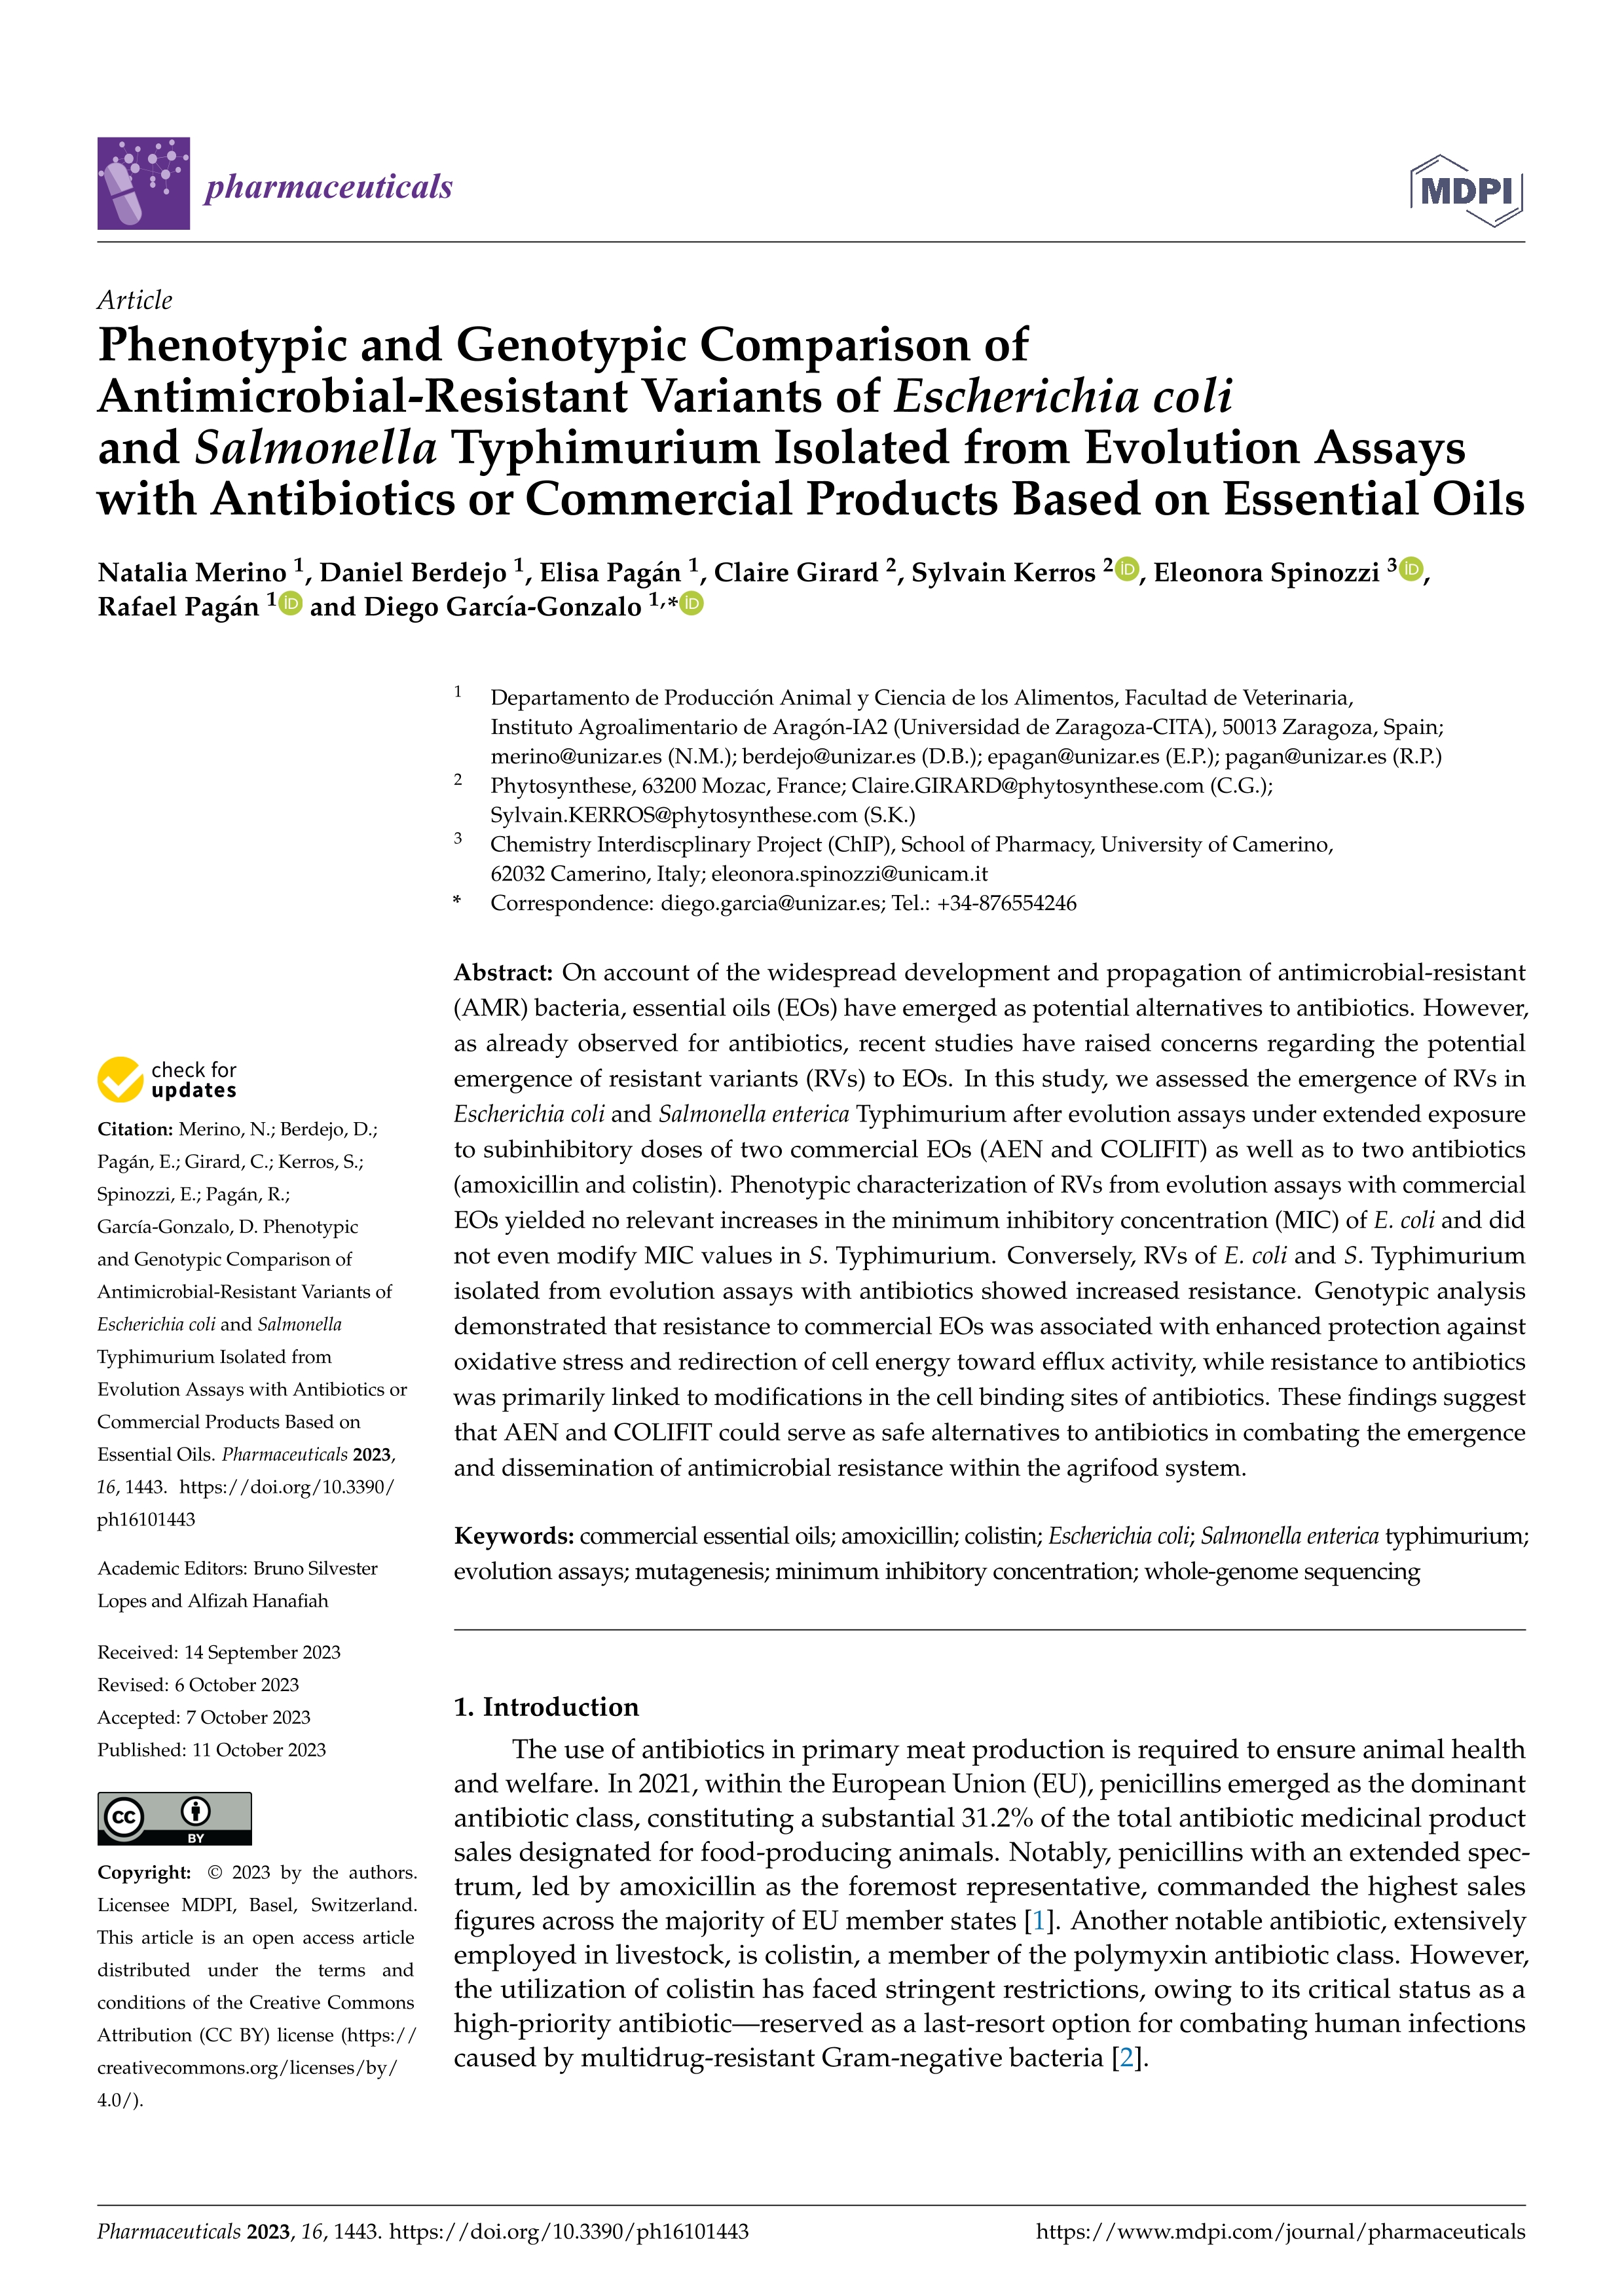 Phenotypic and genotypic comparison of antimicrobial-resistant variants of Escherichia coli and Salmonella Typhimurium isolated from evolution assays with antibiotics or commercial products based on essential oils